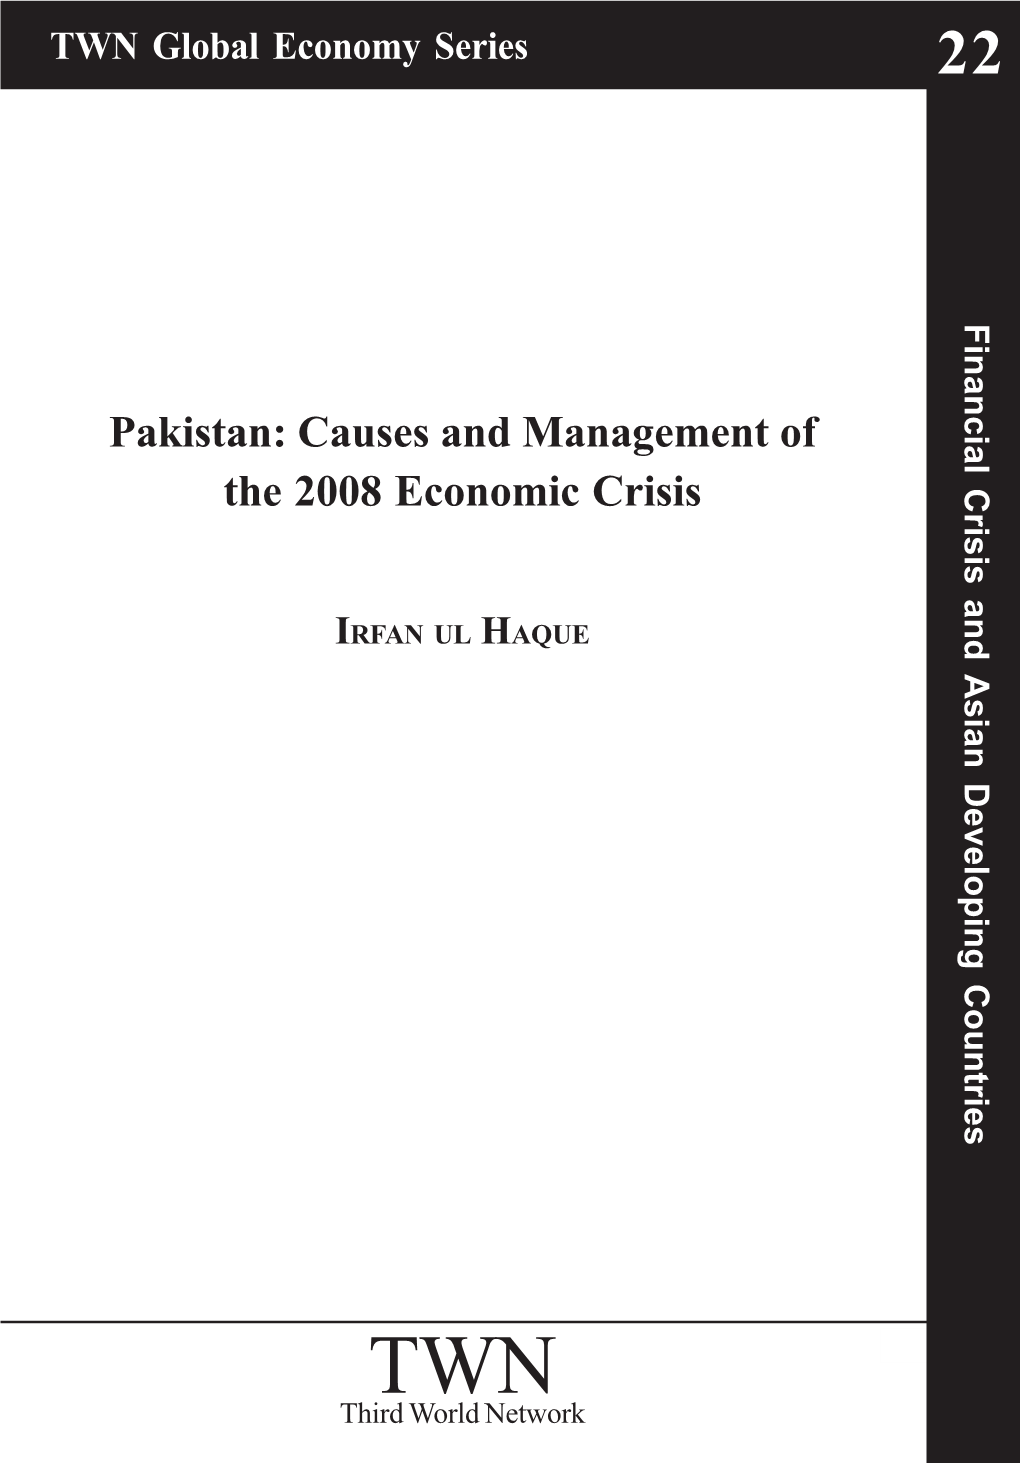 Pakistan: Causes and Management of the 2008 Economic Crisis